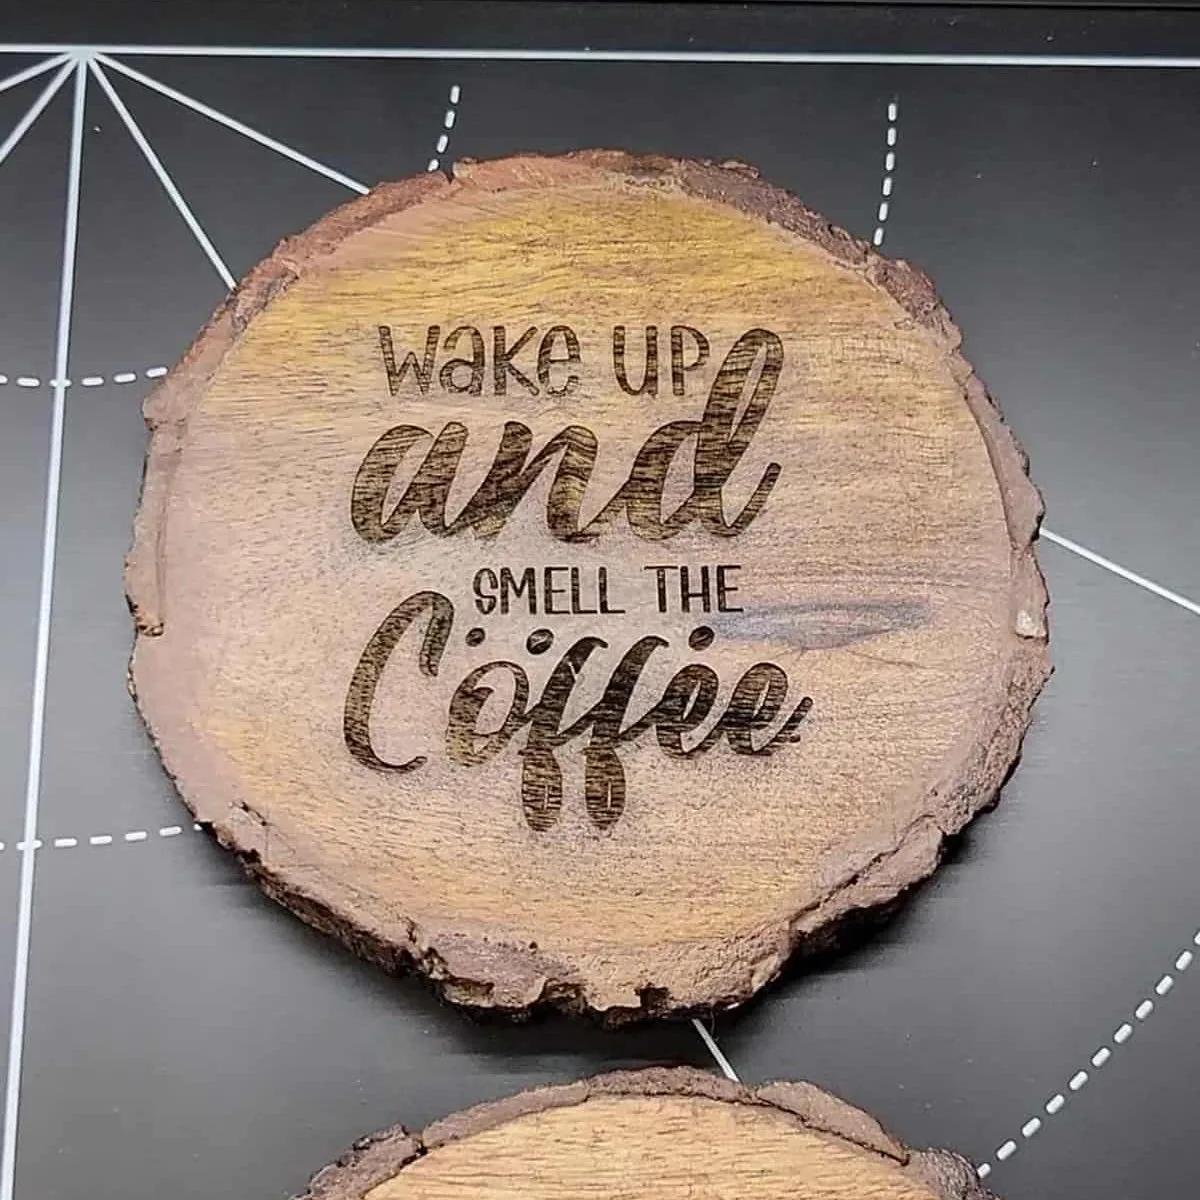 laser engraved wood coaster that says "wake up and smell the coffee.